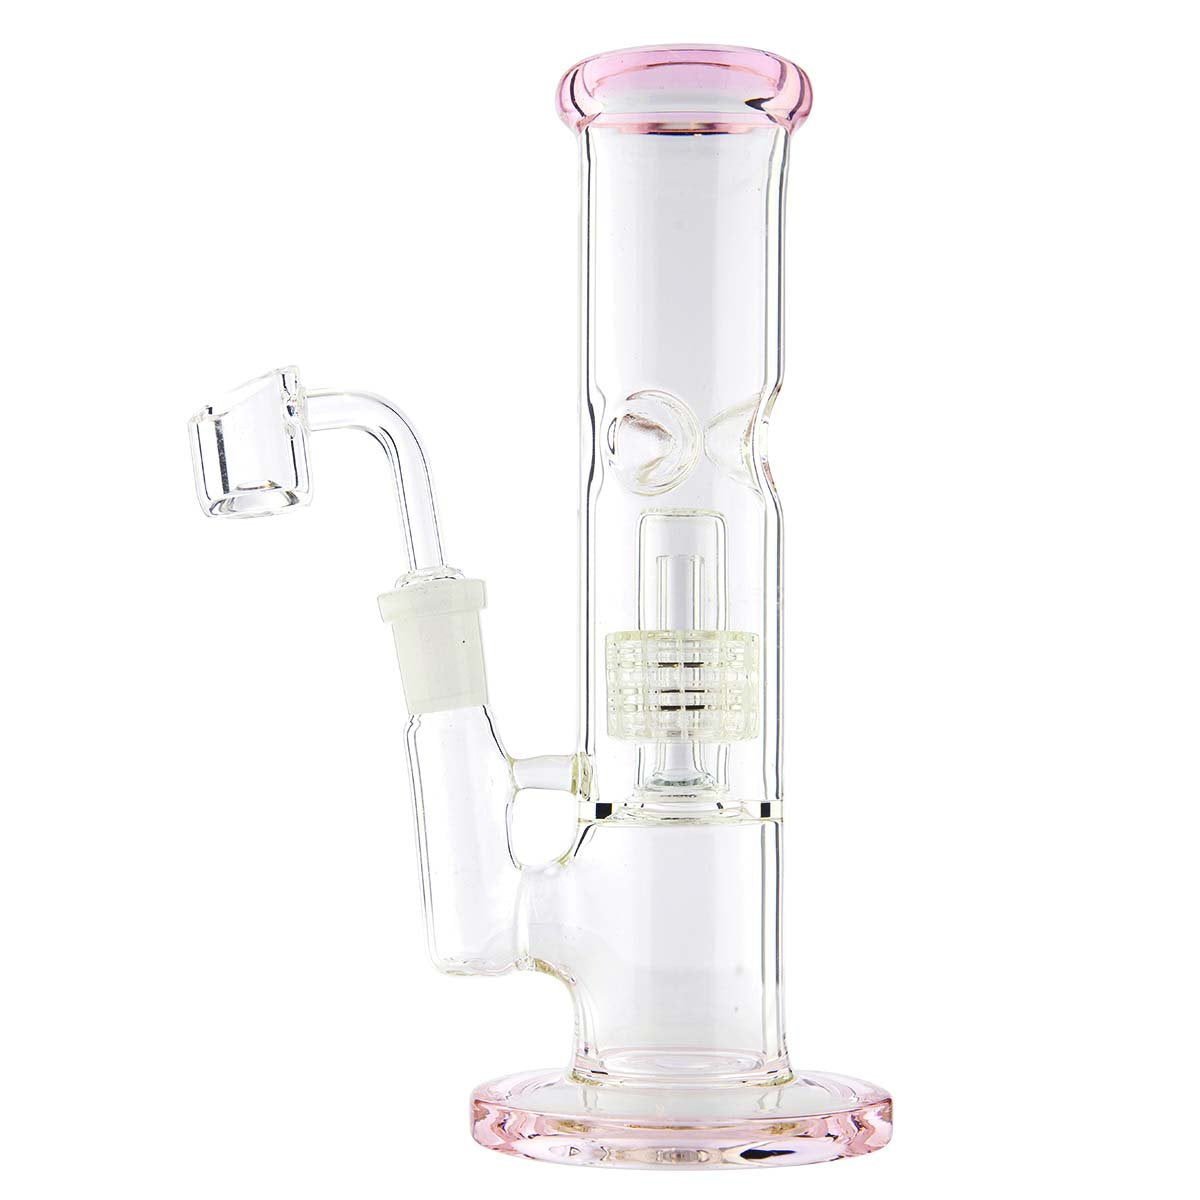 Waterpipe G/g Conical Showerhead 8 14Mm Female With Bowl And Banger Pink